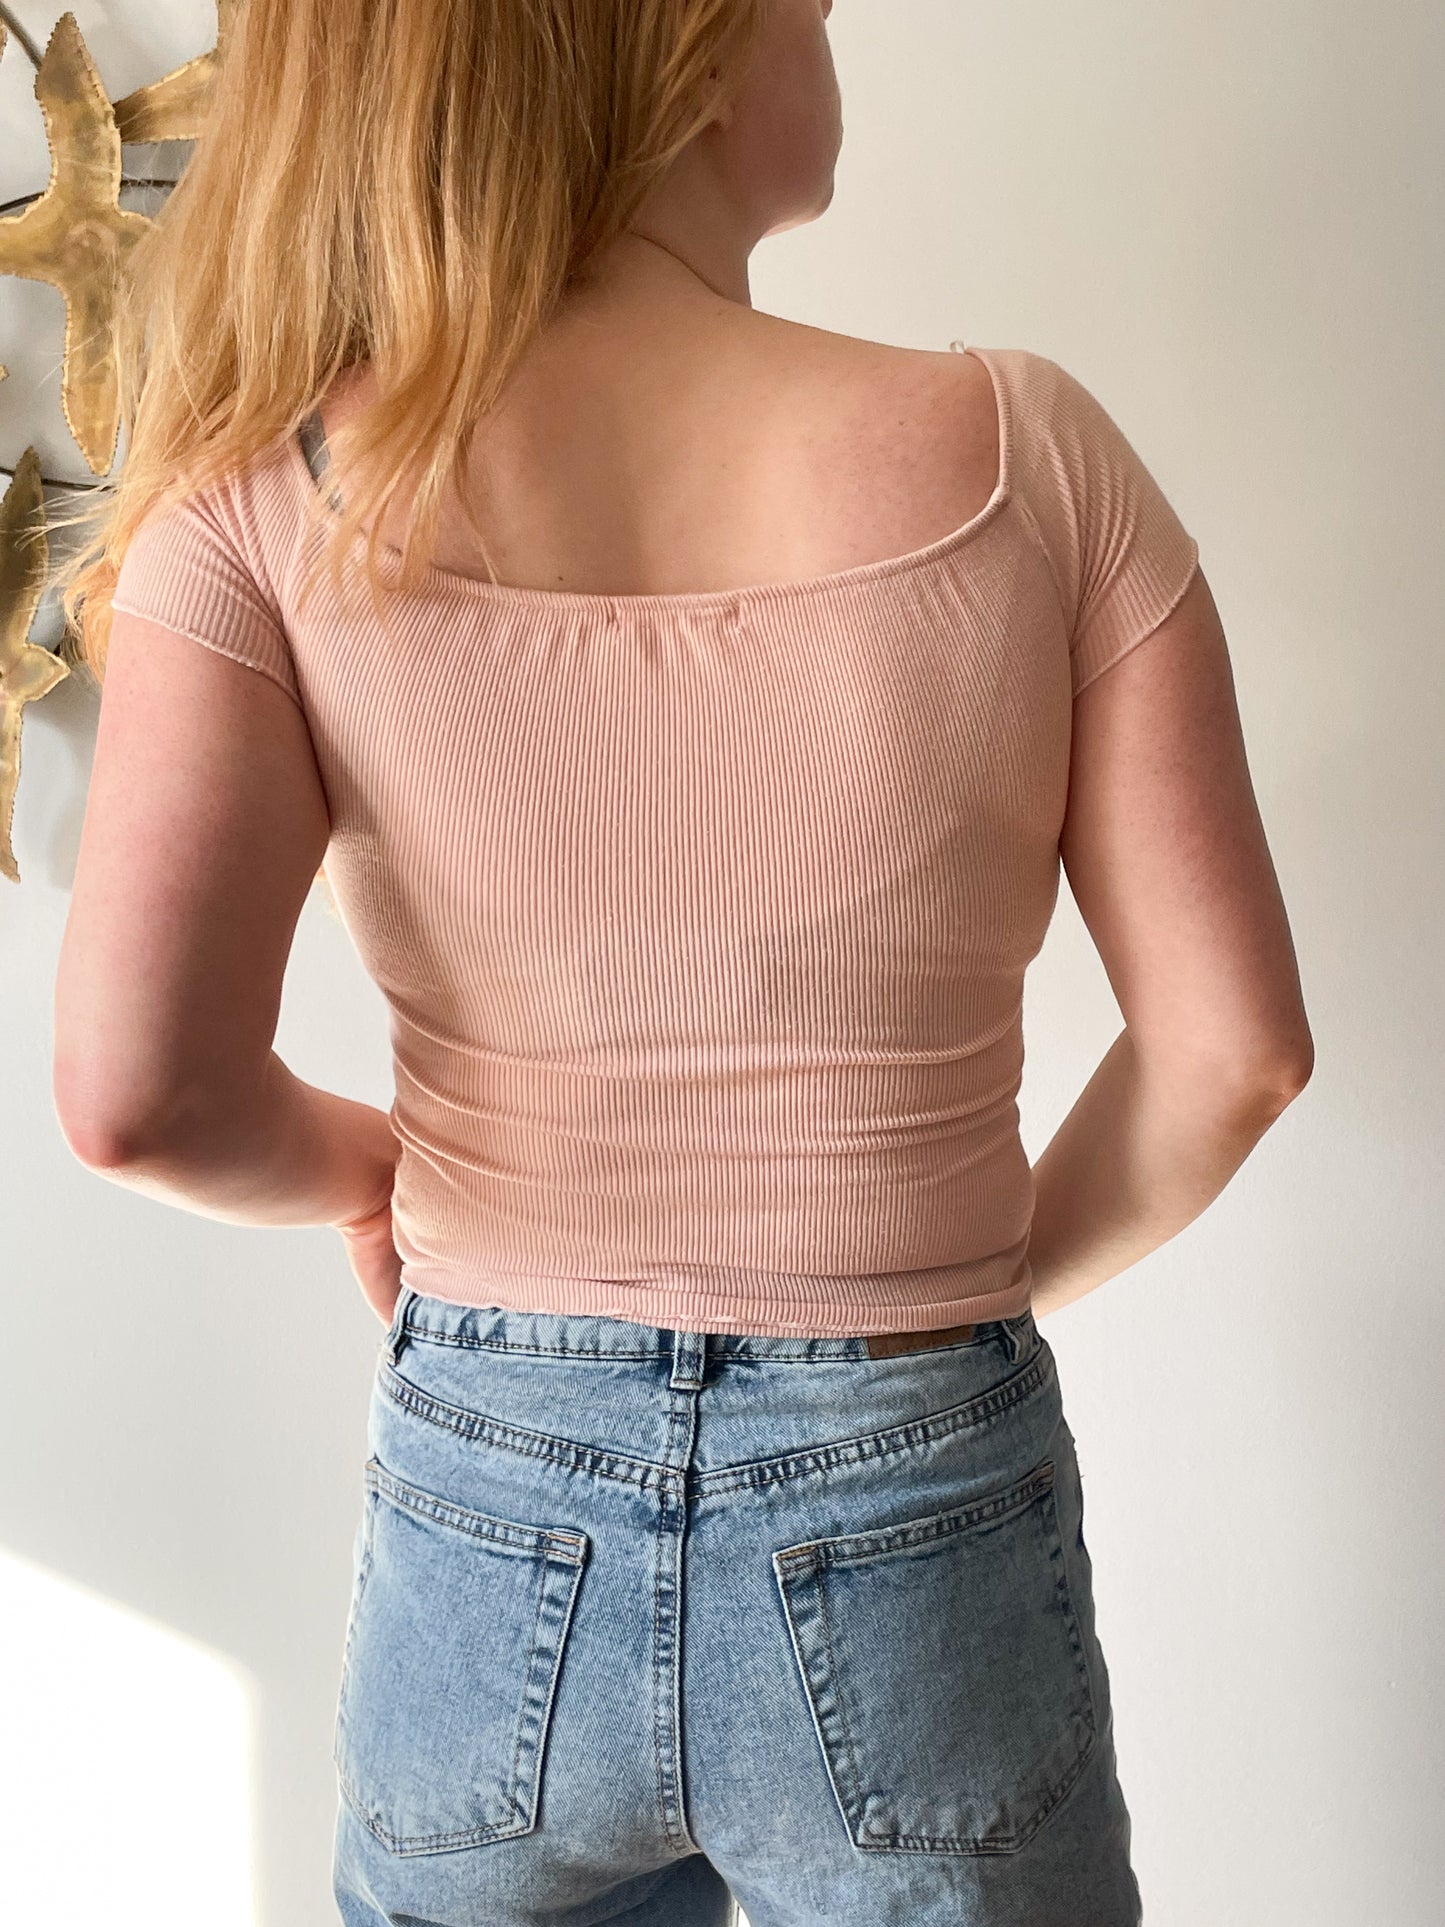 Blush Pink Ribbed Stretch Cropped Top - XS/S